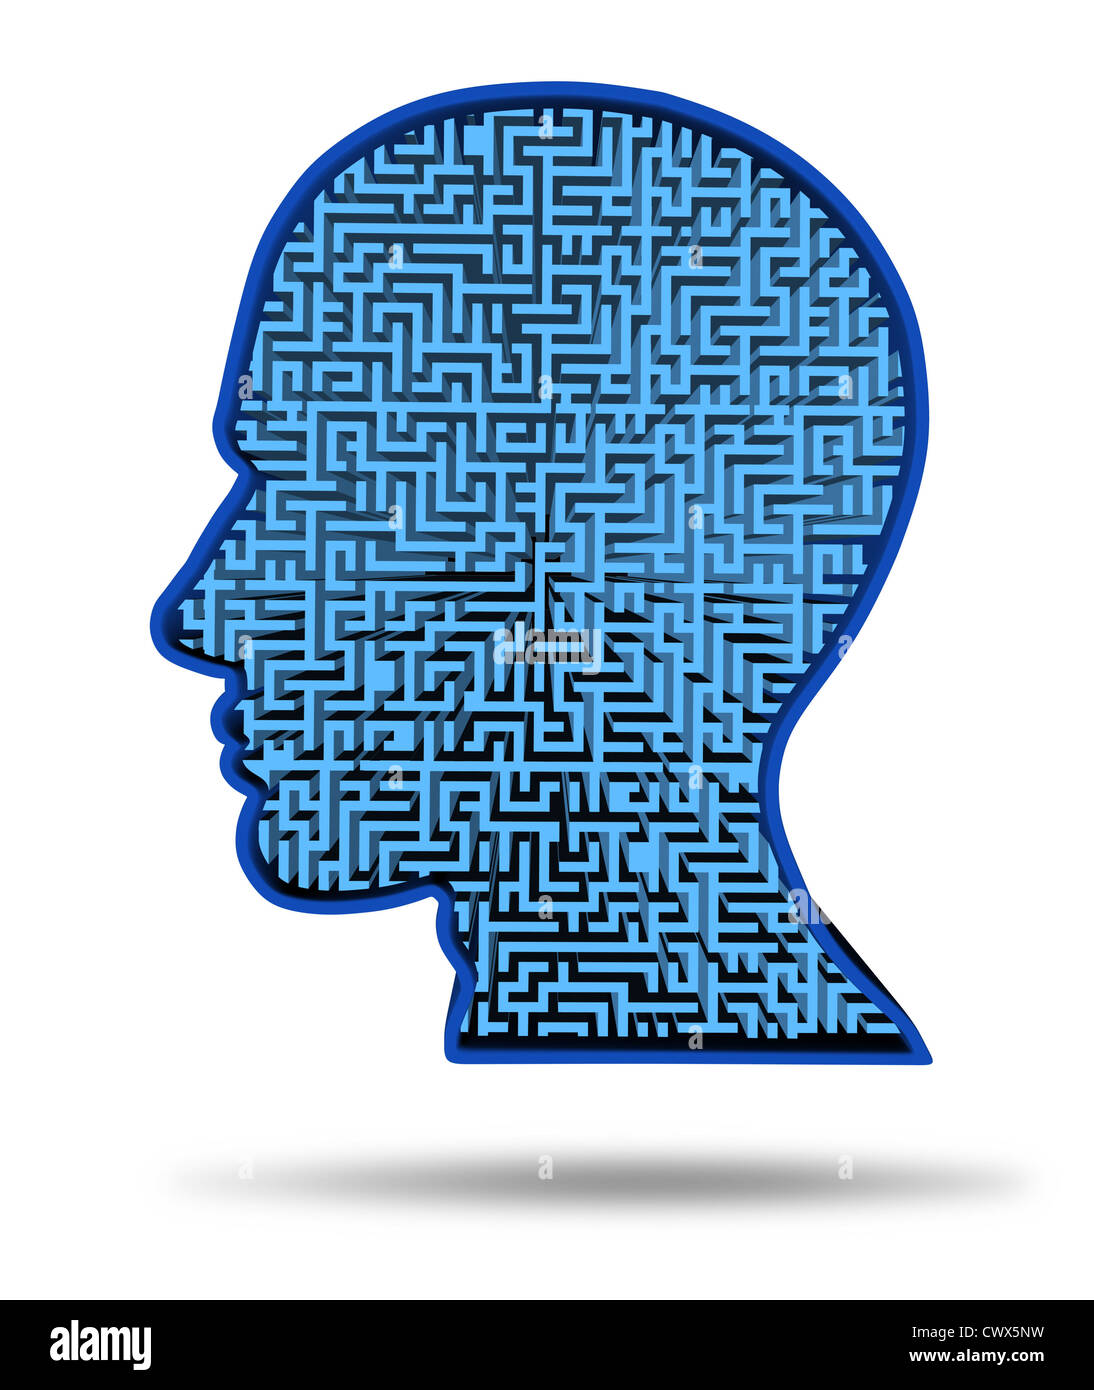 Finding a cure for a brain disease symbol with a maze and labyrinth in the shape of a human head as a concept of research into t Stock Photo